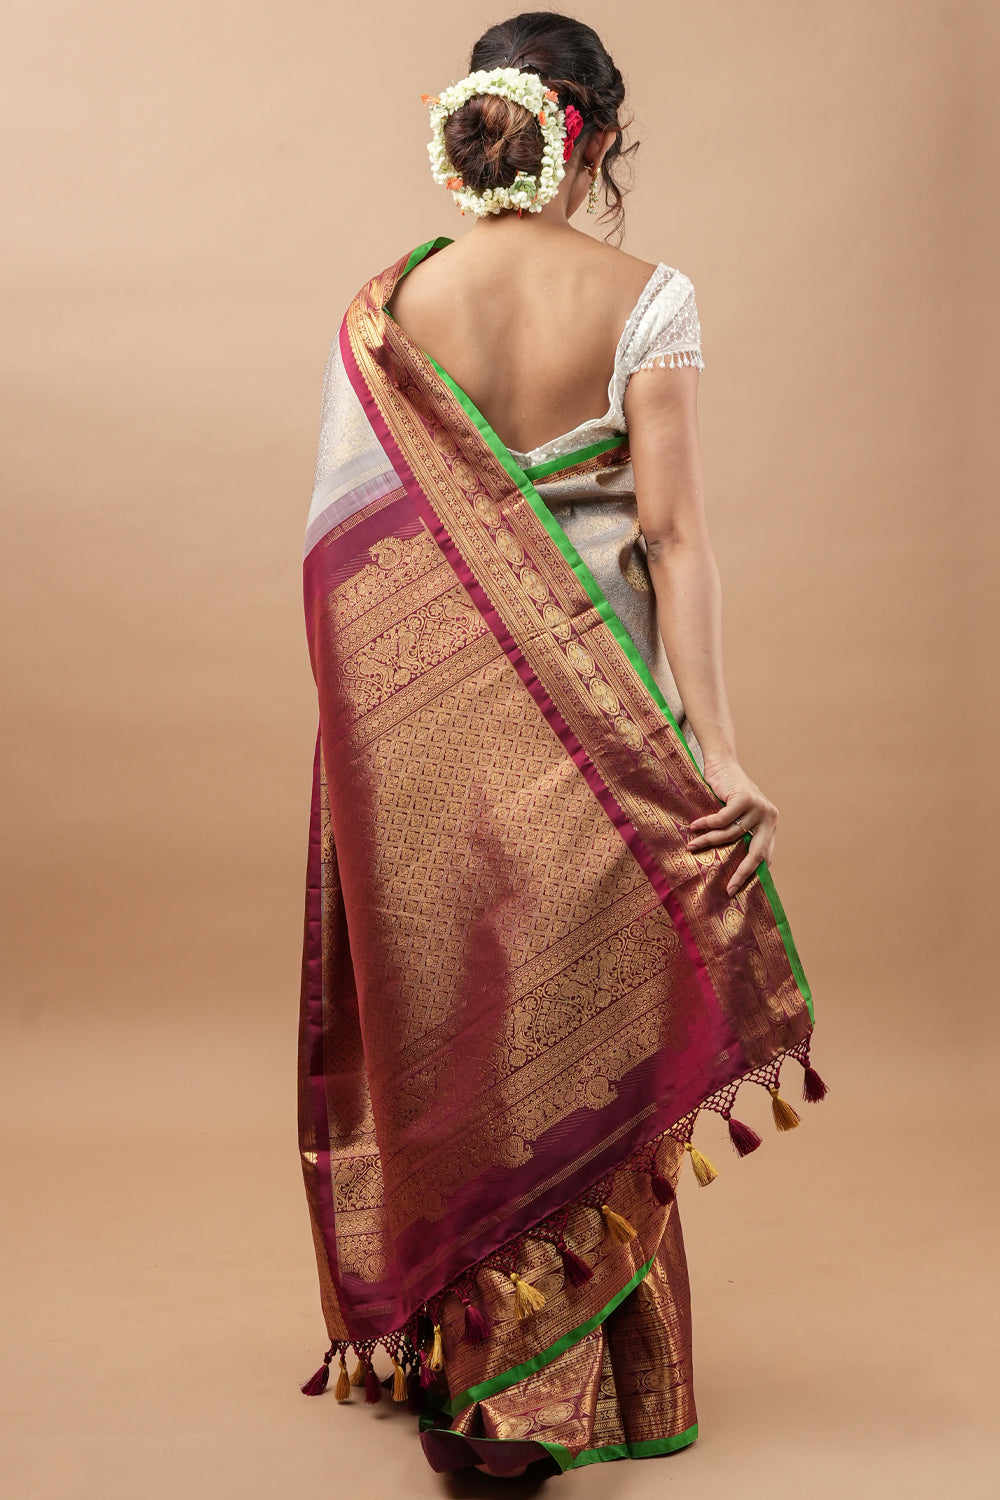 Gray Exquisite Brocade Gadwal Silk Saree with floral Jaal and extravagant 16 inch Zari border | SILK MARK CERTIFIED